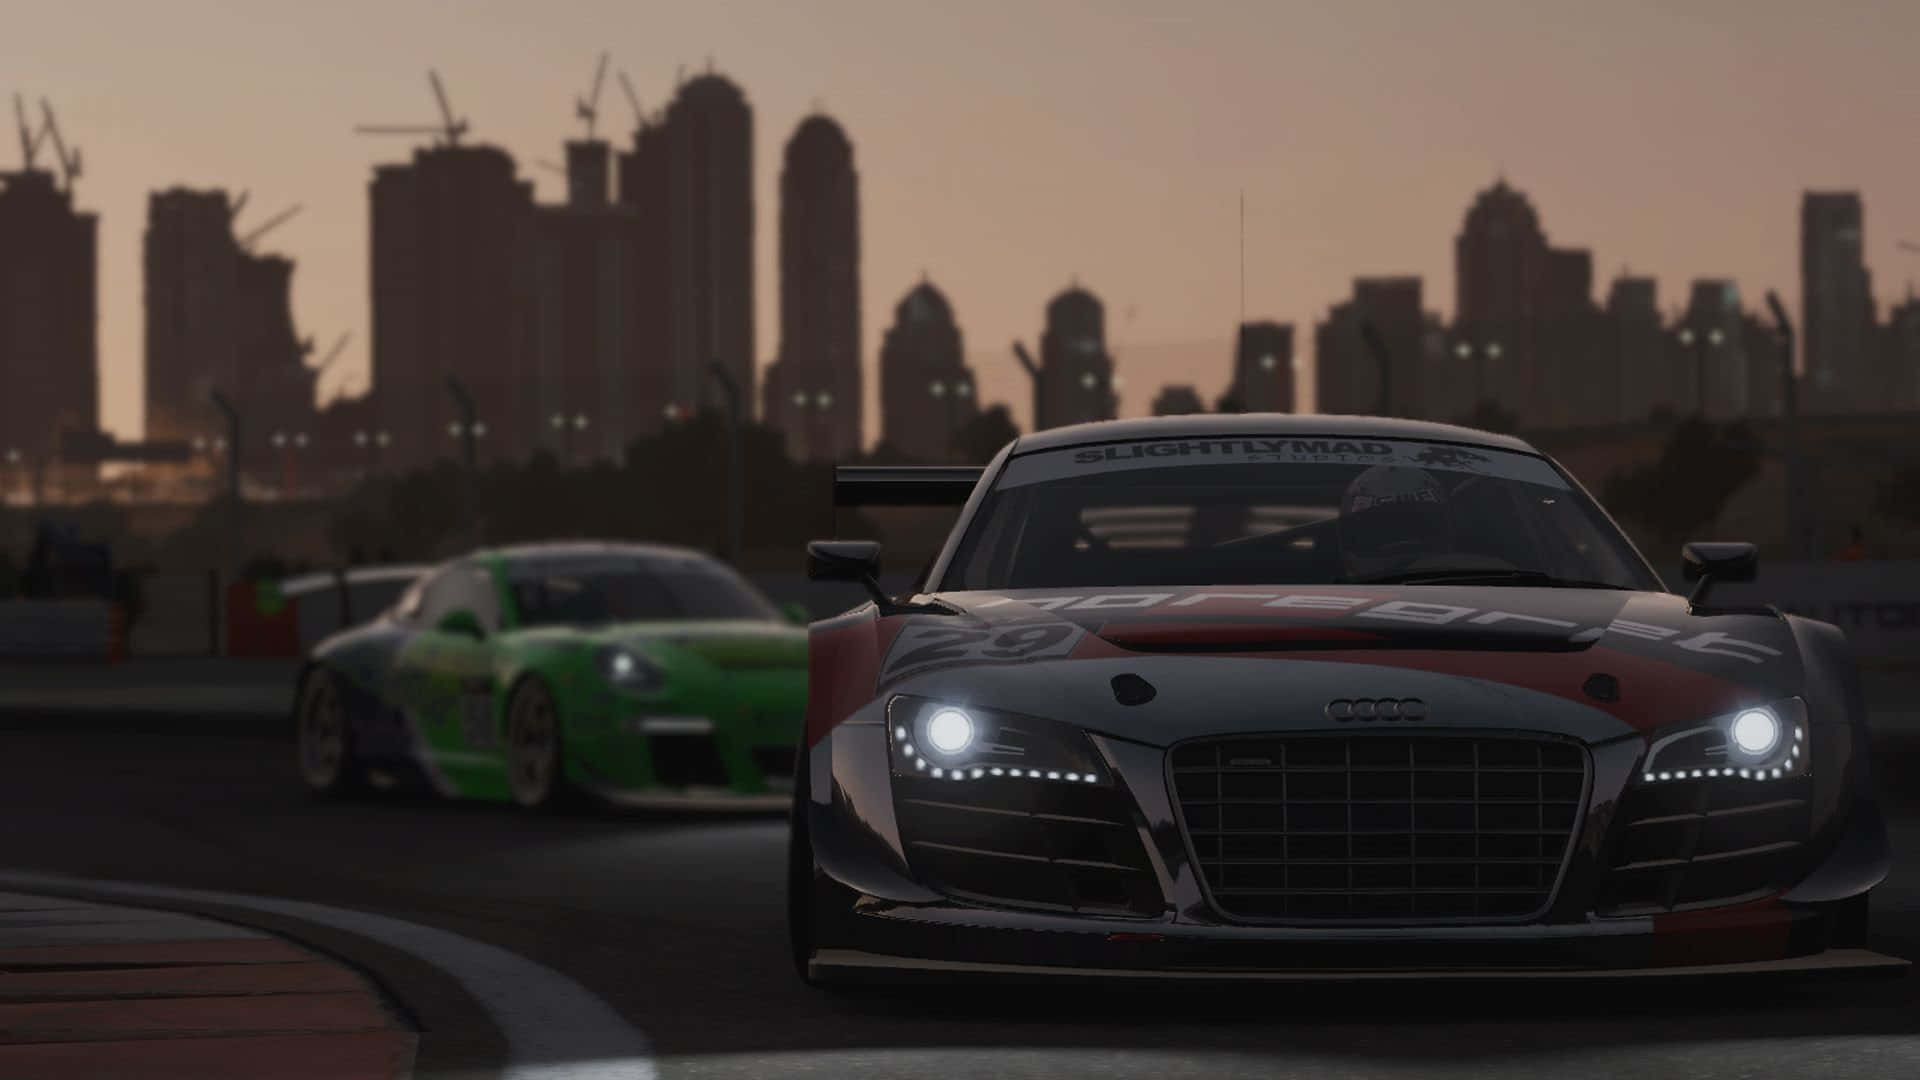 Audi R8 Slammed Into A City In A Racing Game